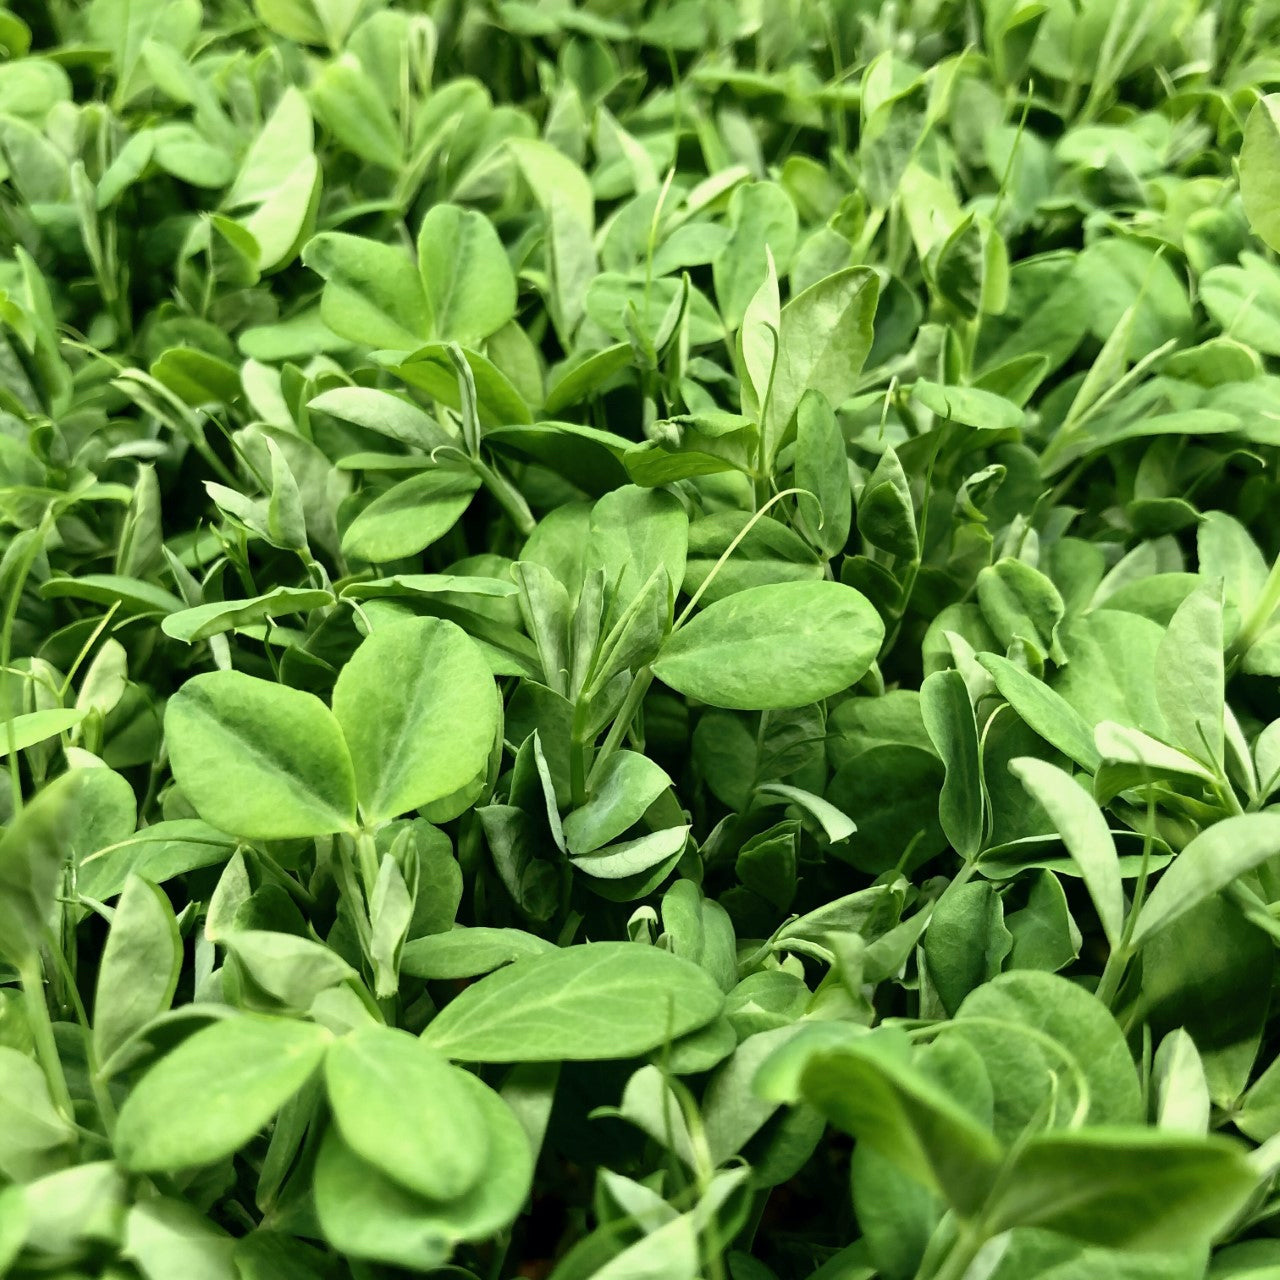 Sweet pea microgreens are light to medium green and have long slender stems with oval leaves and tendrils.